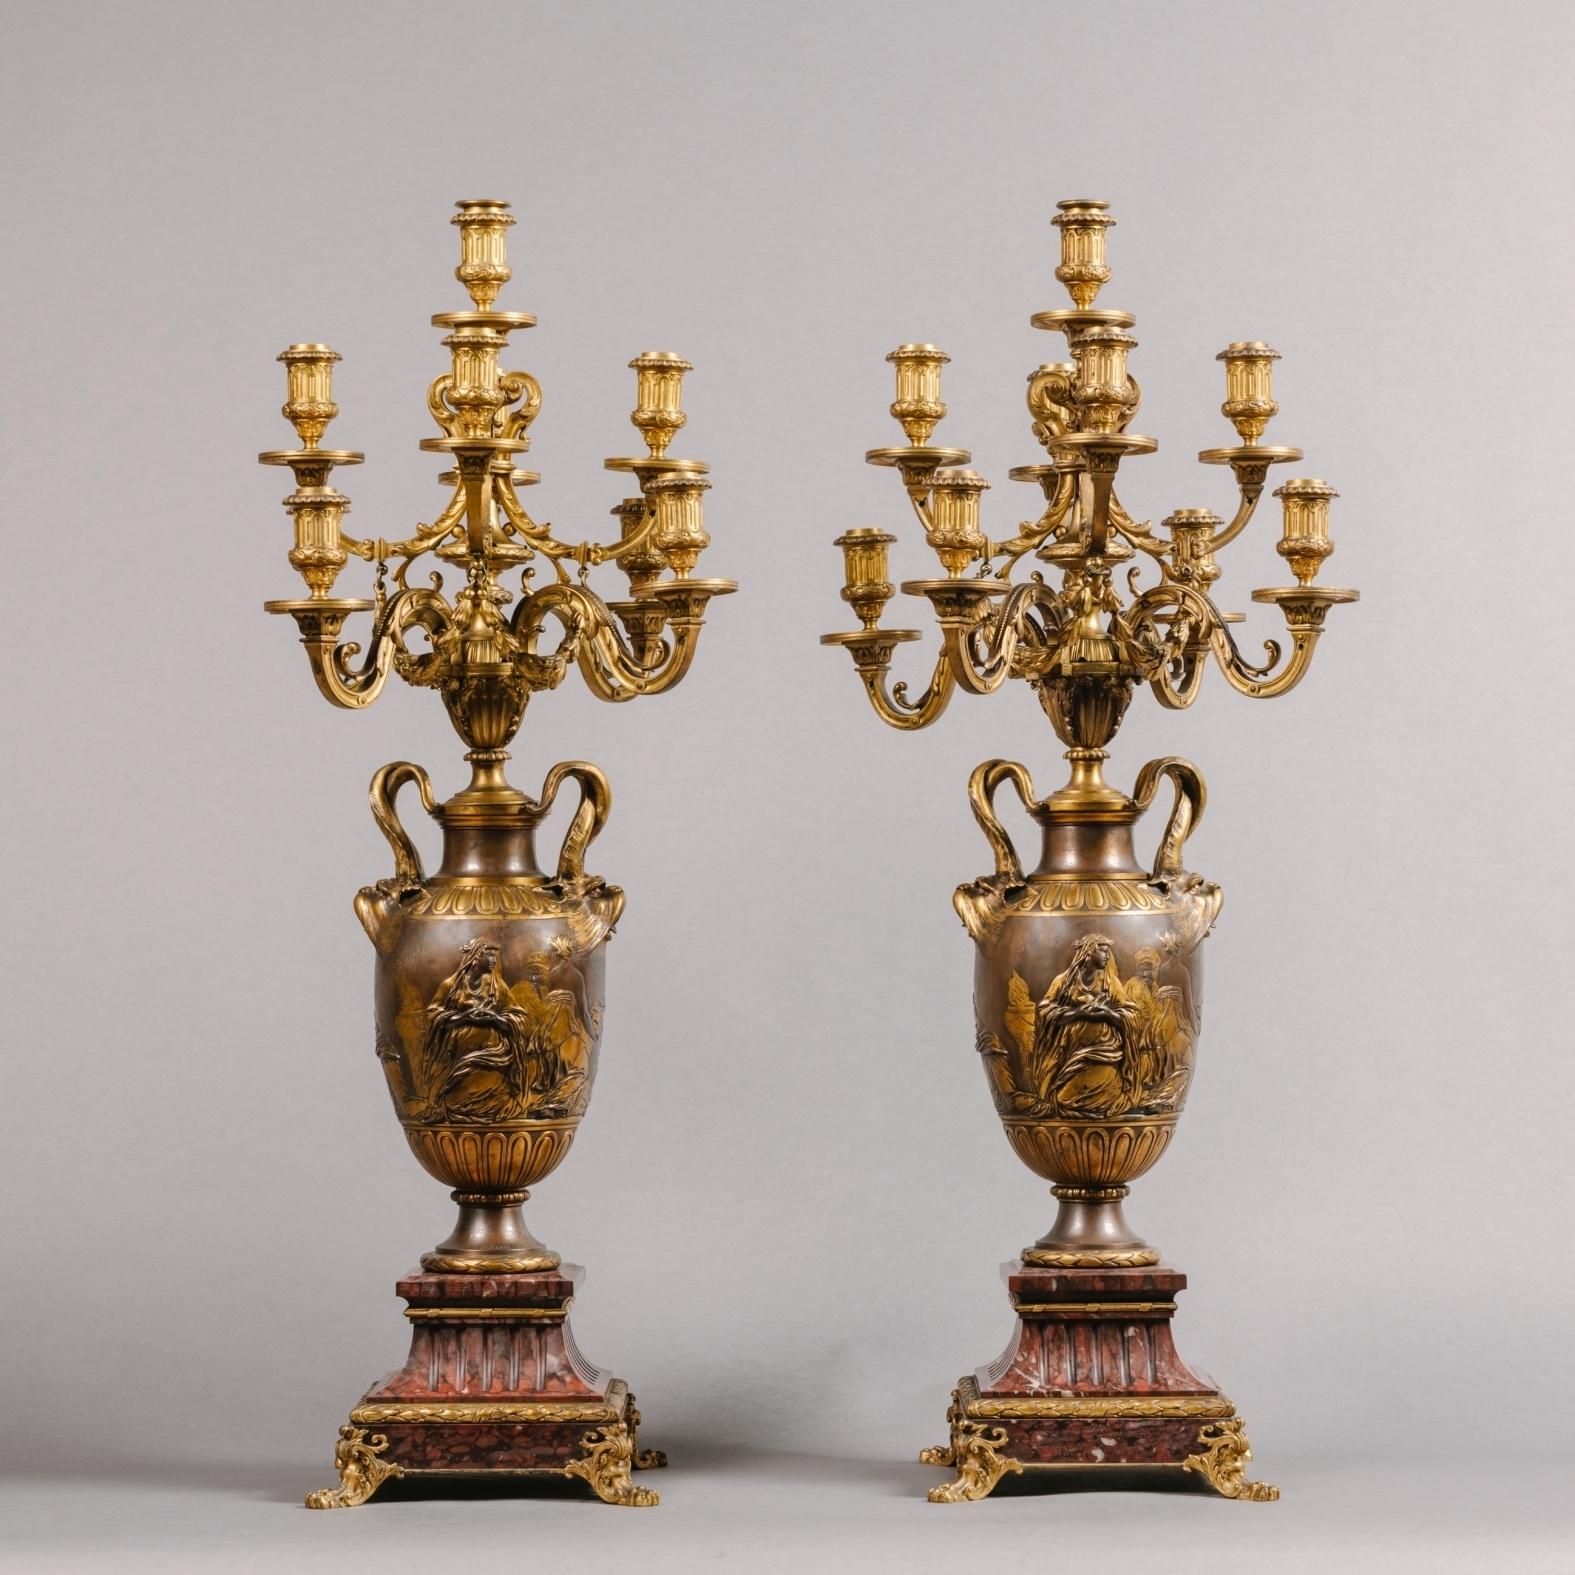 A fine pair of neoclassical style gilt and patinated bronze nine-light candelabra by Ferdinand Barbedienne,
French, Circa 1870.